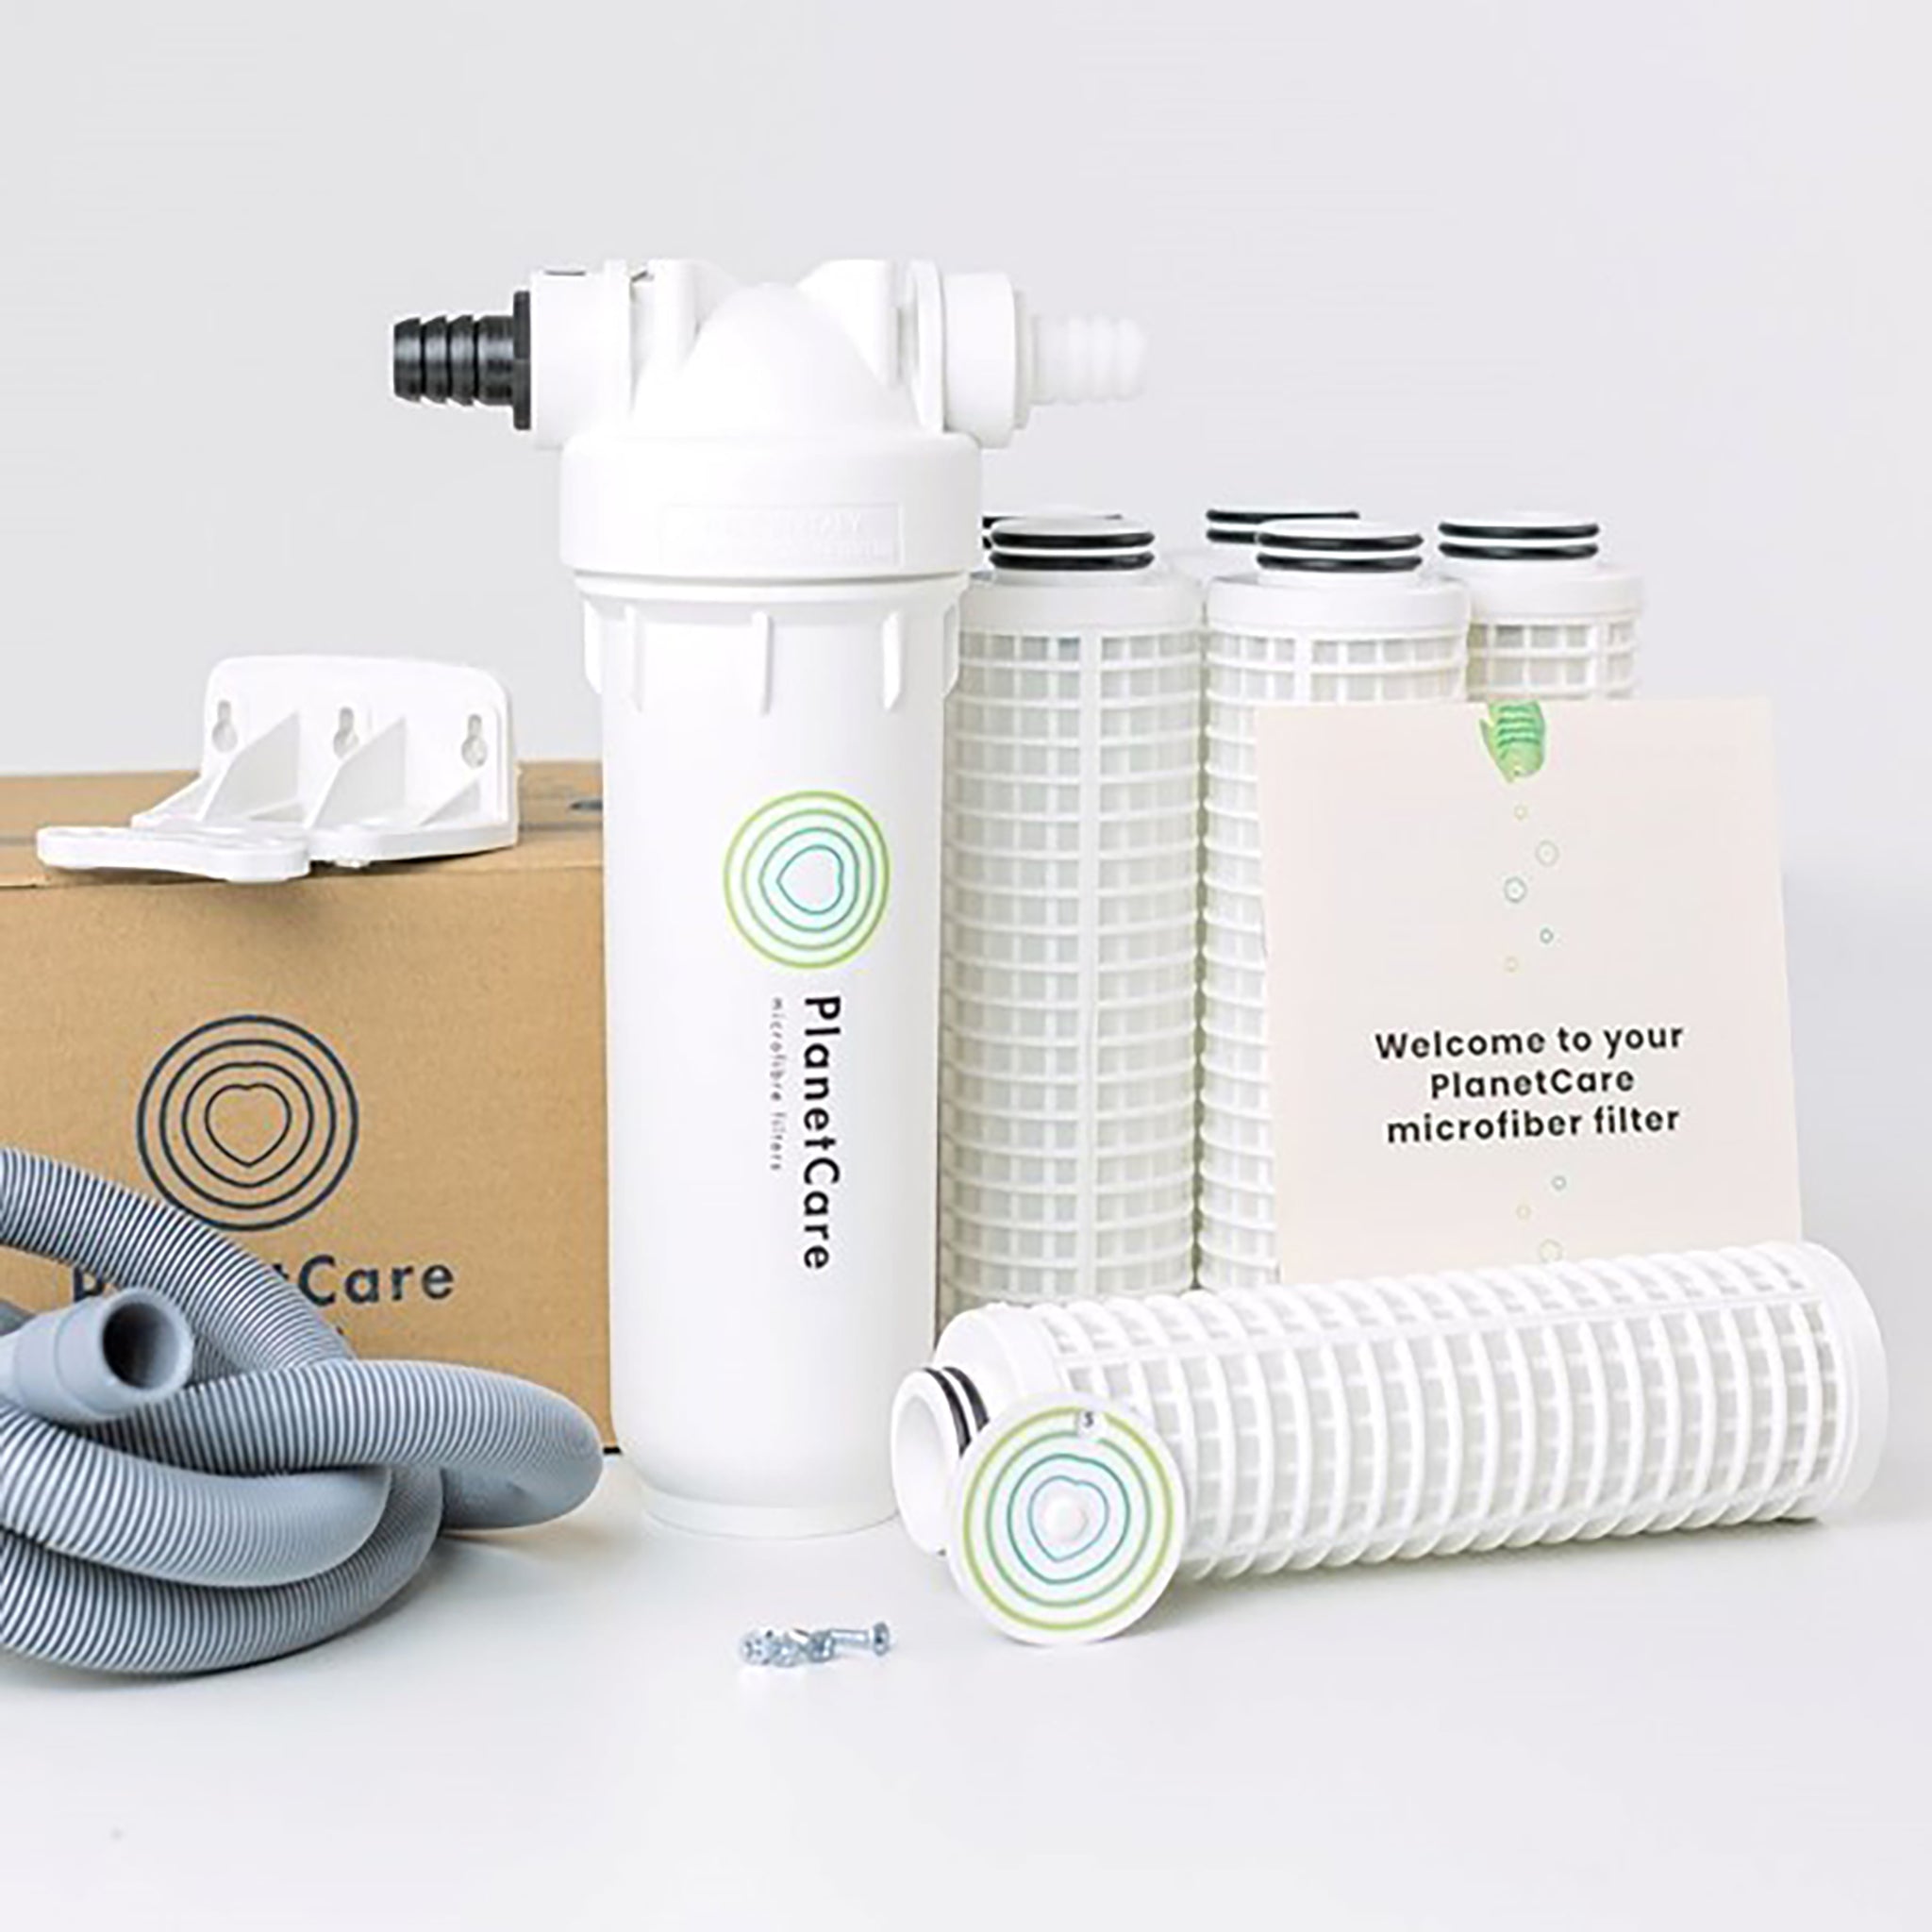 PlanetCare microfiber filter starter kit what's in the box